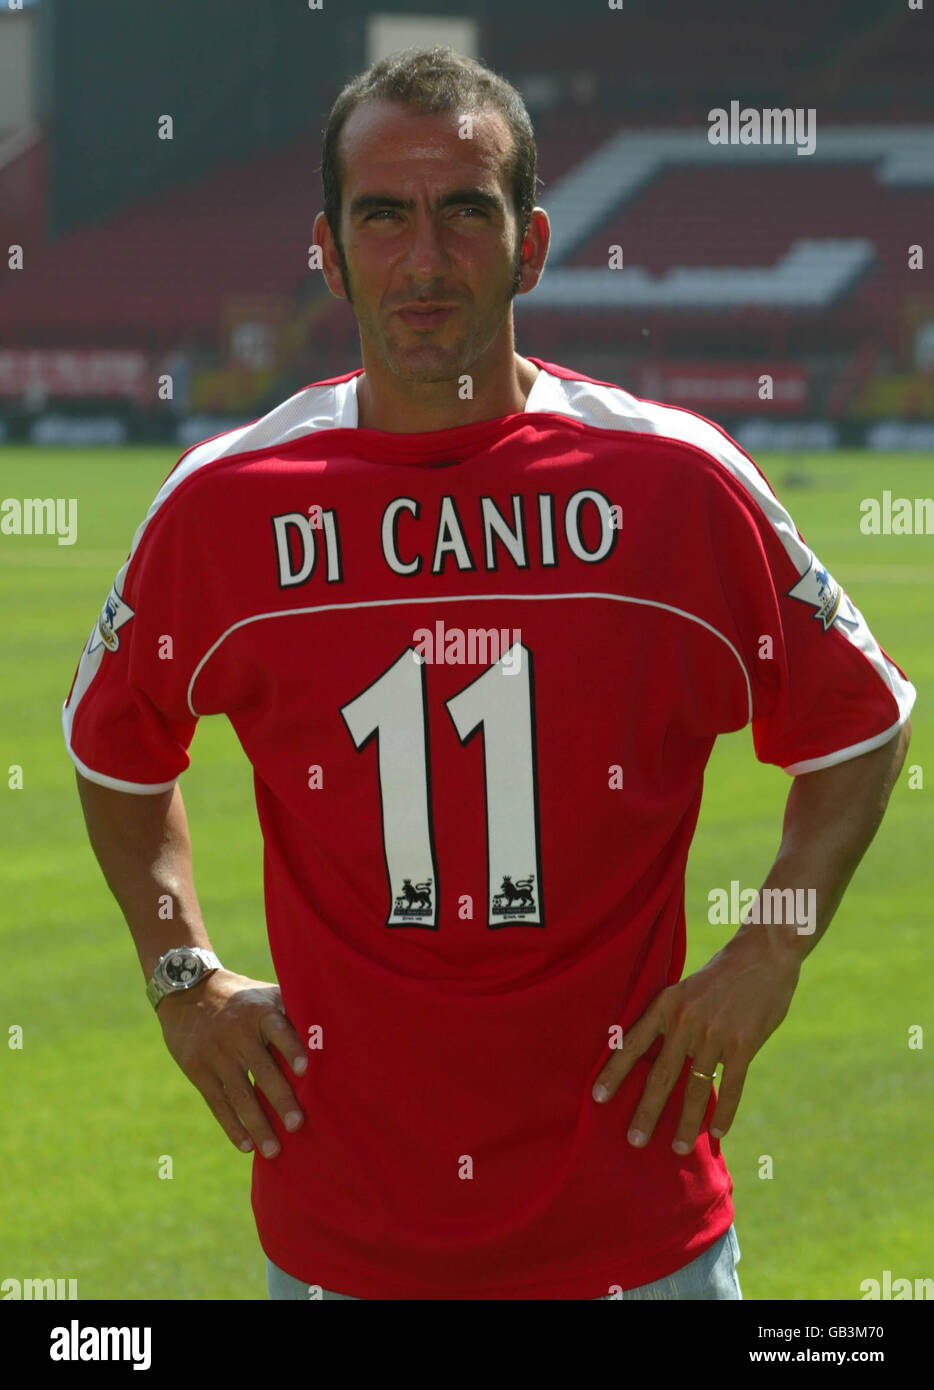 Soccer - FA Barclaycard Premiership - Charlton Press Conference - Paolo Di Canio signing. Charlton Athletic's new signing Paolo Di Canio wears his shirt back to front Stock Photo